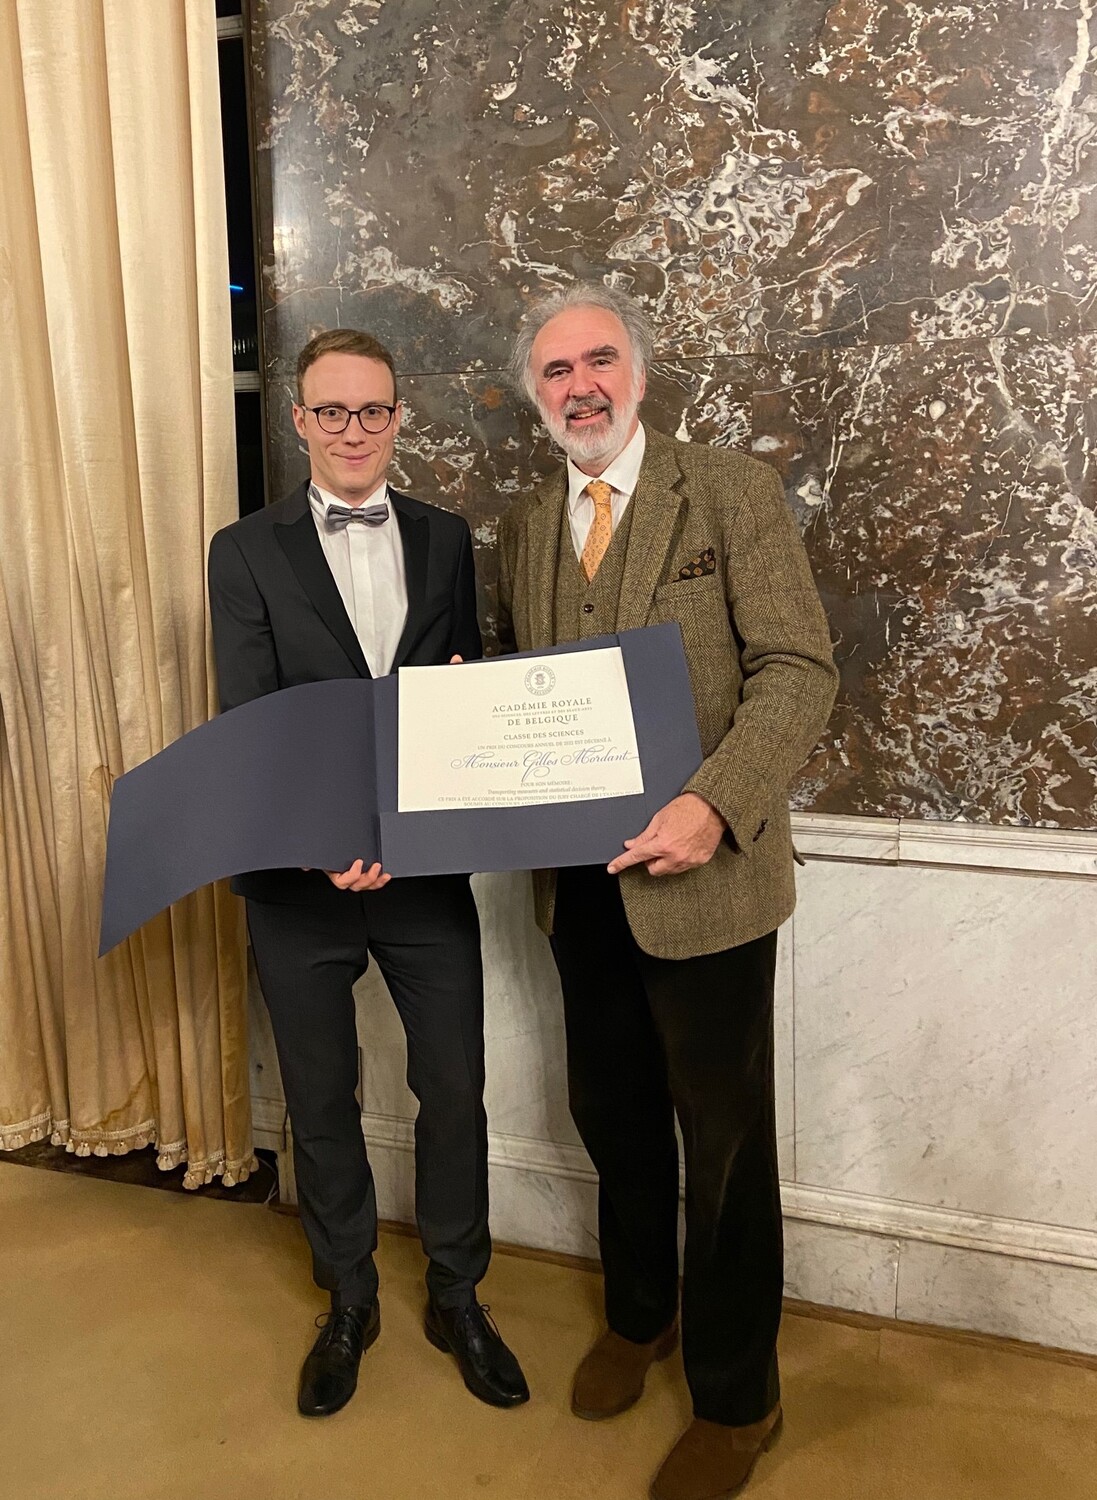 Award in Brussels: Dr Gilles Mordant on the left, Professor Didier Viviers (left), Secretary of the Belgian Royal Academy of Sciences (right)